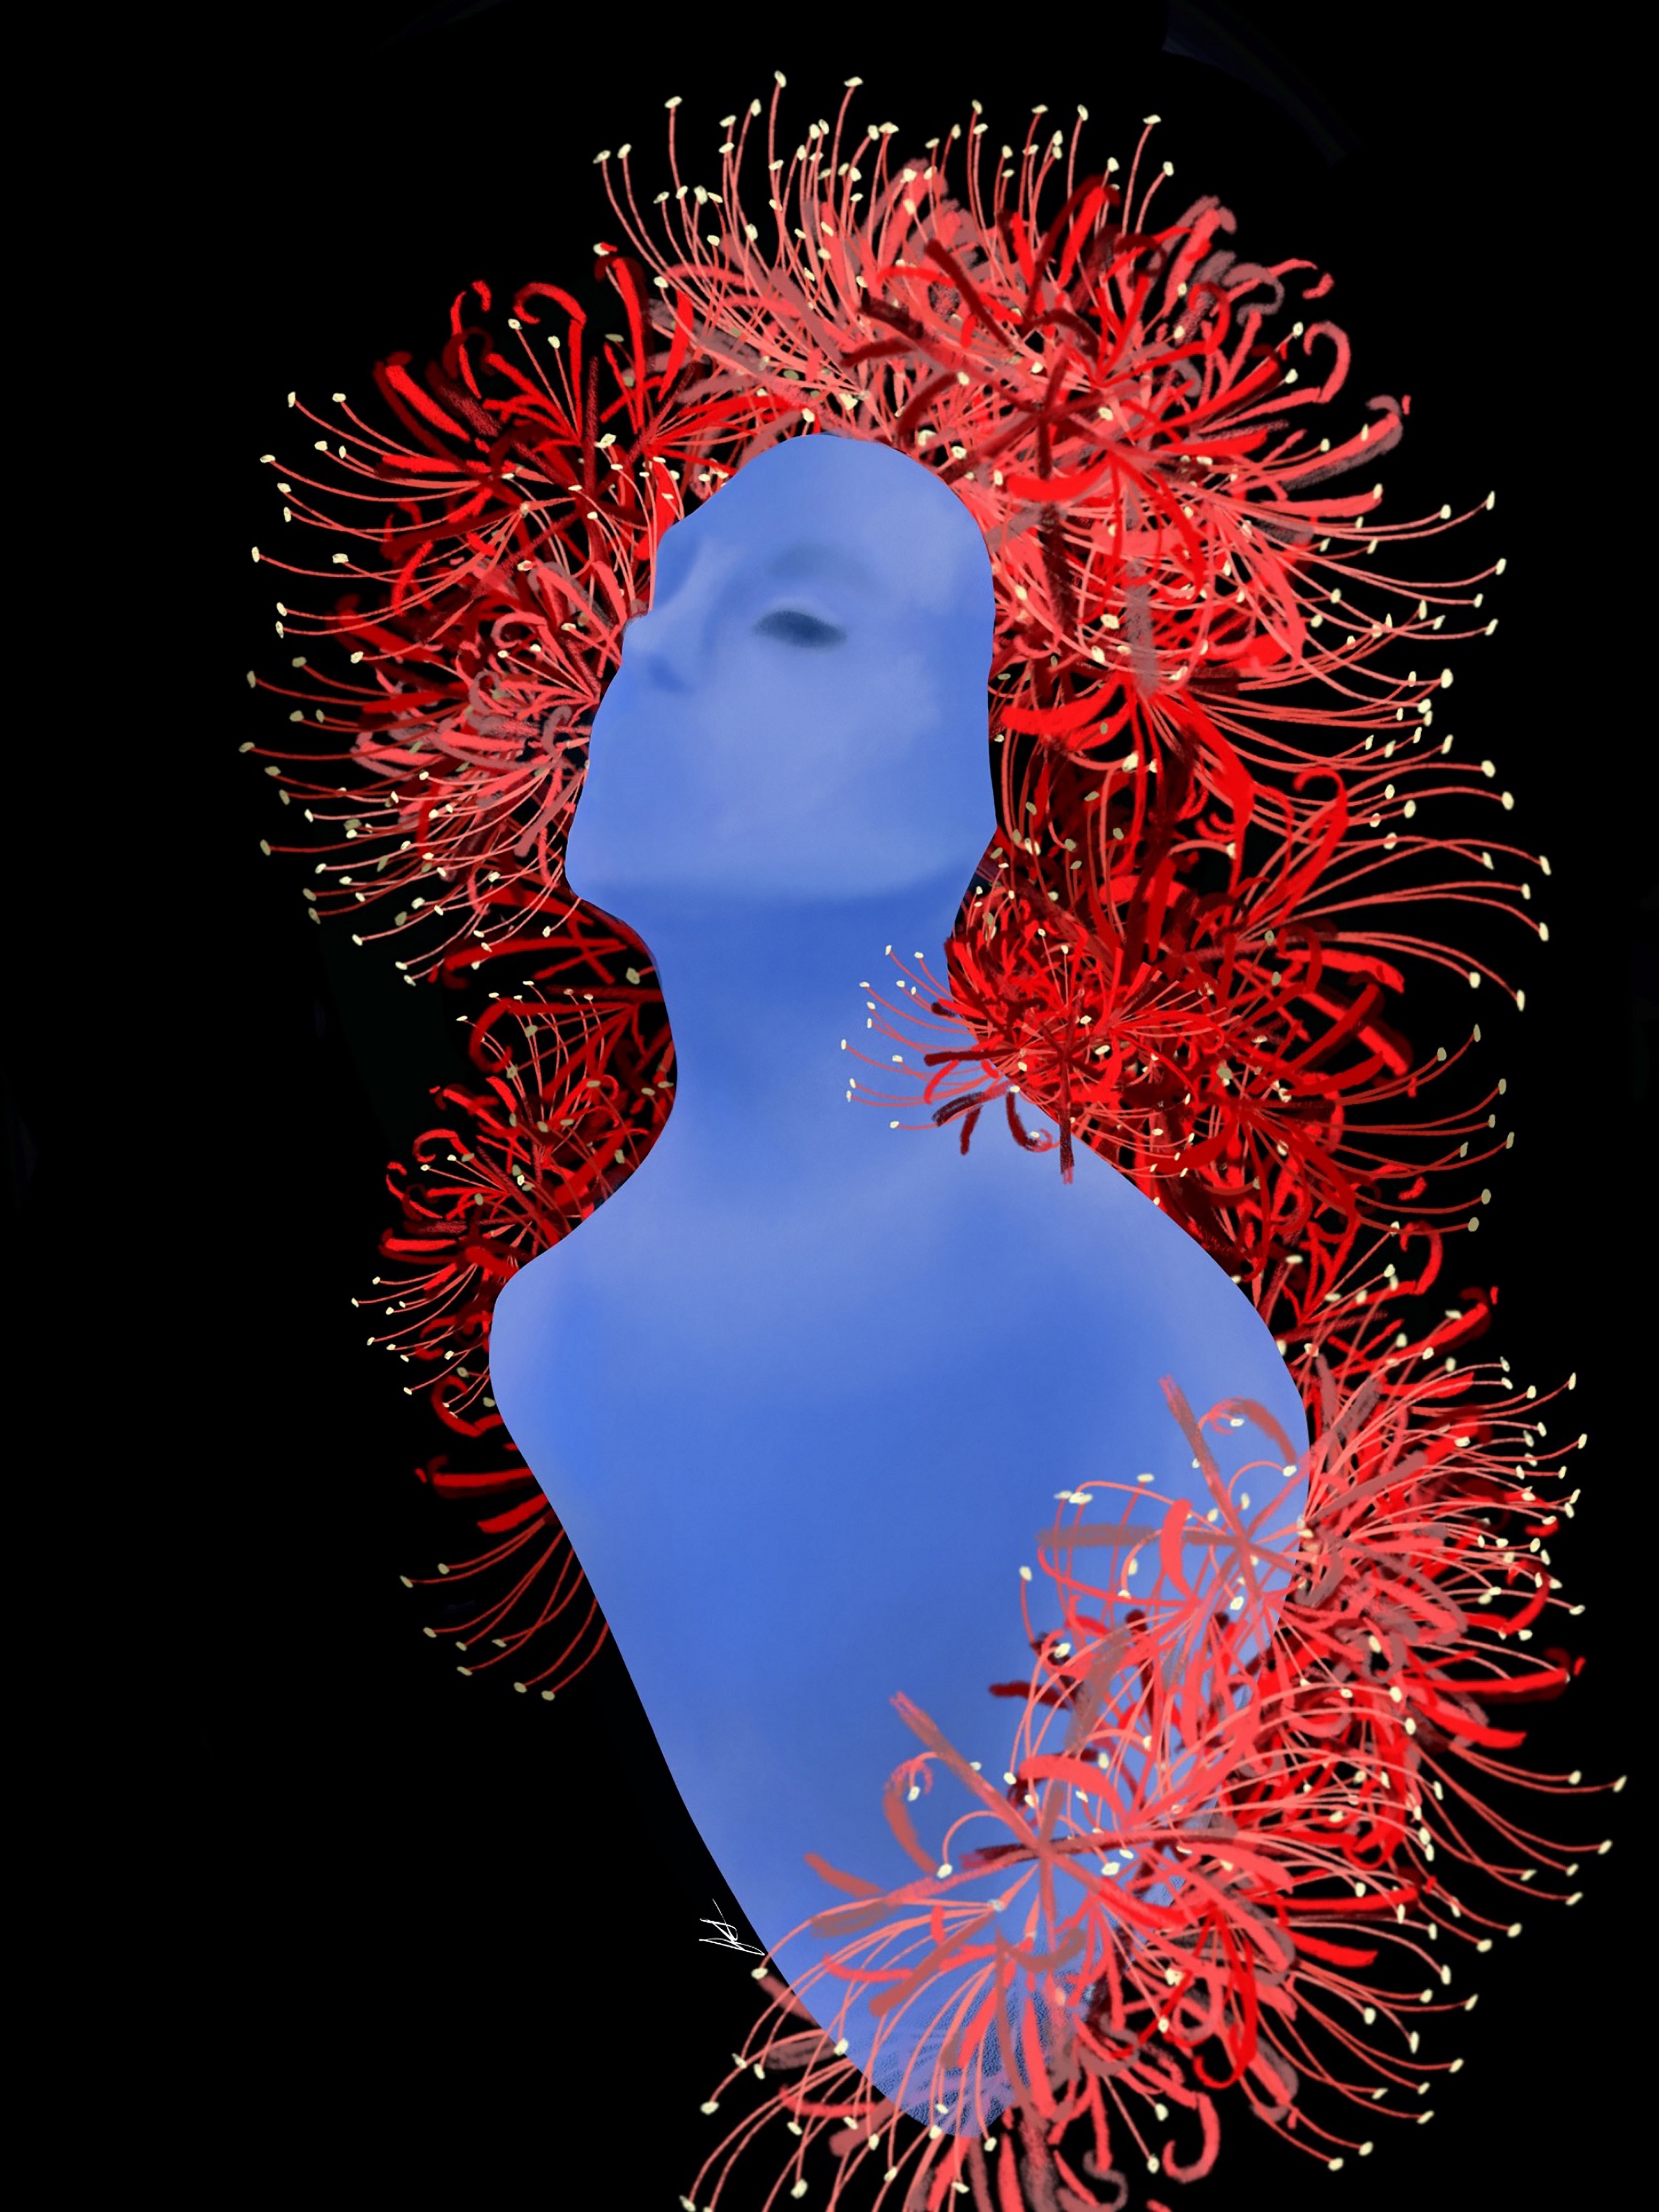 PICTURED: An illustration of a blue torso and head covered in red tendrils.